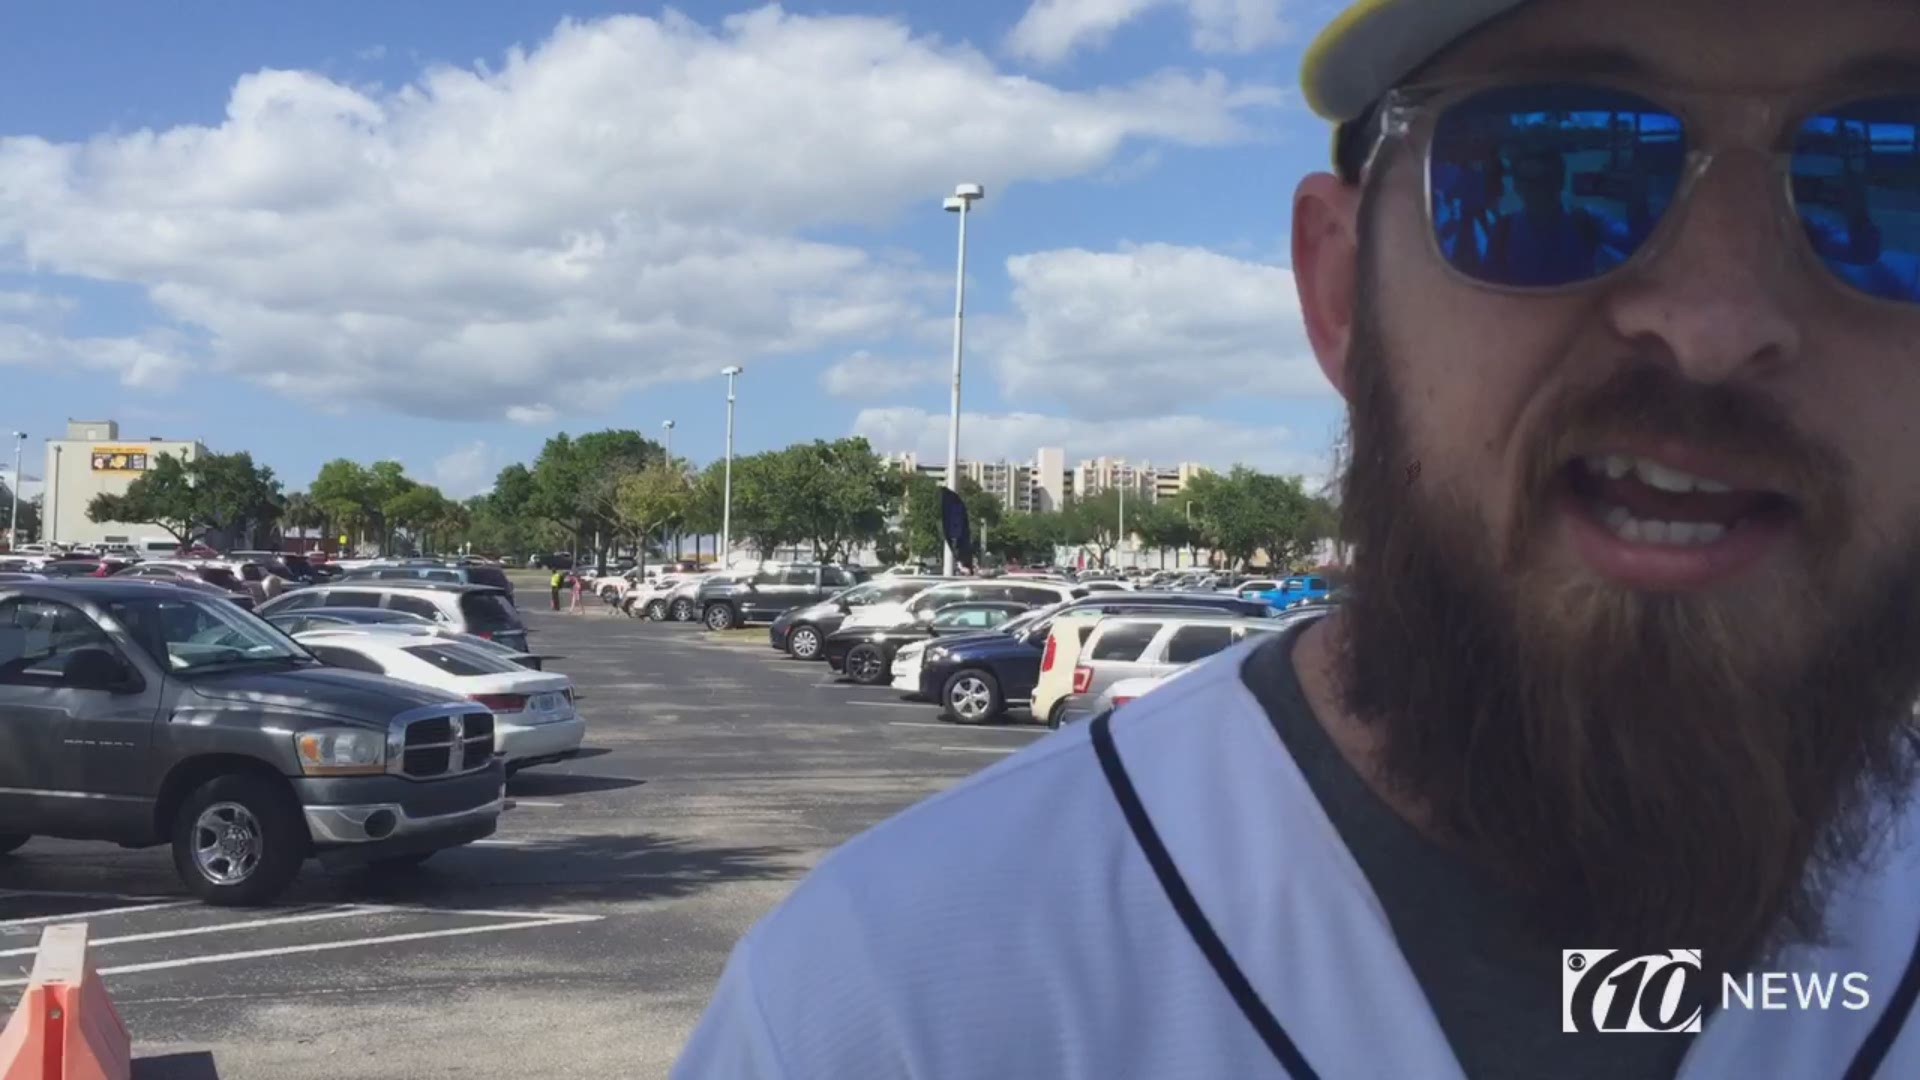 A Tampa Bay Rays fan describes why he attended Opening Day at Tropicana Field in St. Petersburg, Florida. https://on.wtsp.com/2TzQzaf